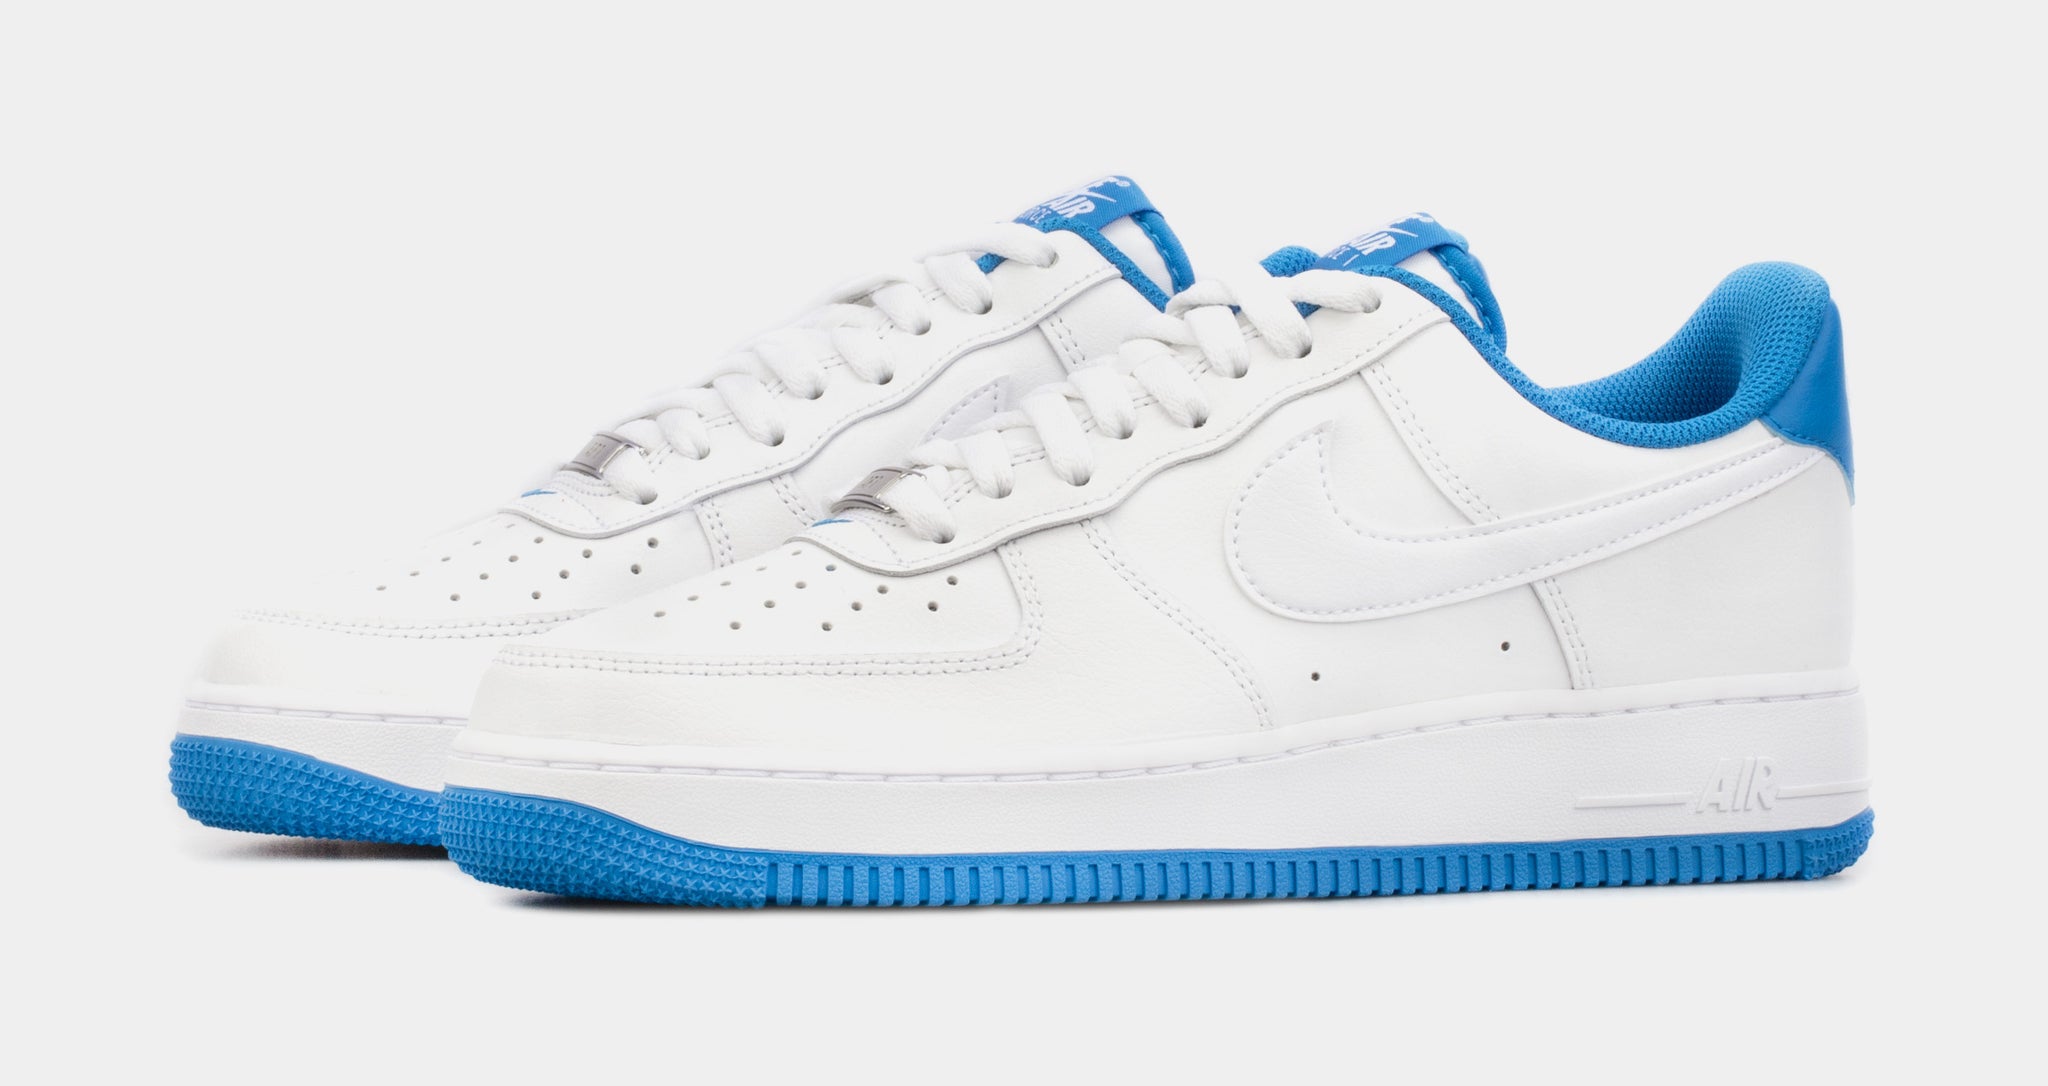 Blue Patent Leather Glazes Over The Nike Air Force 1 Low - Sneaker